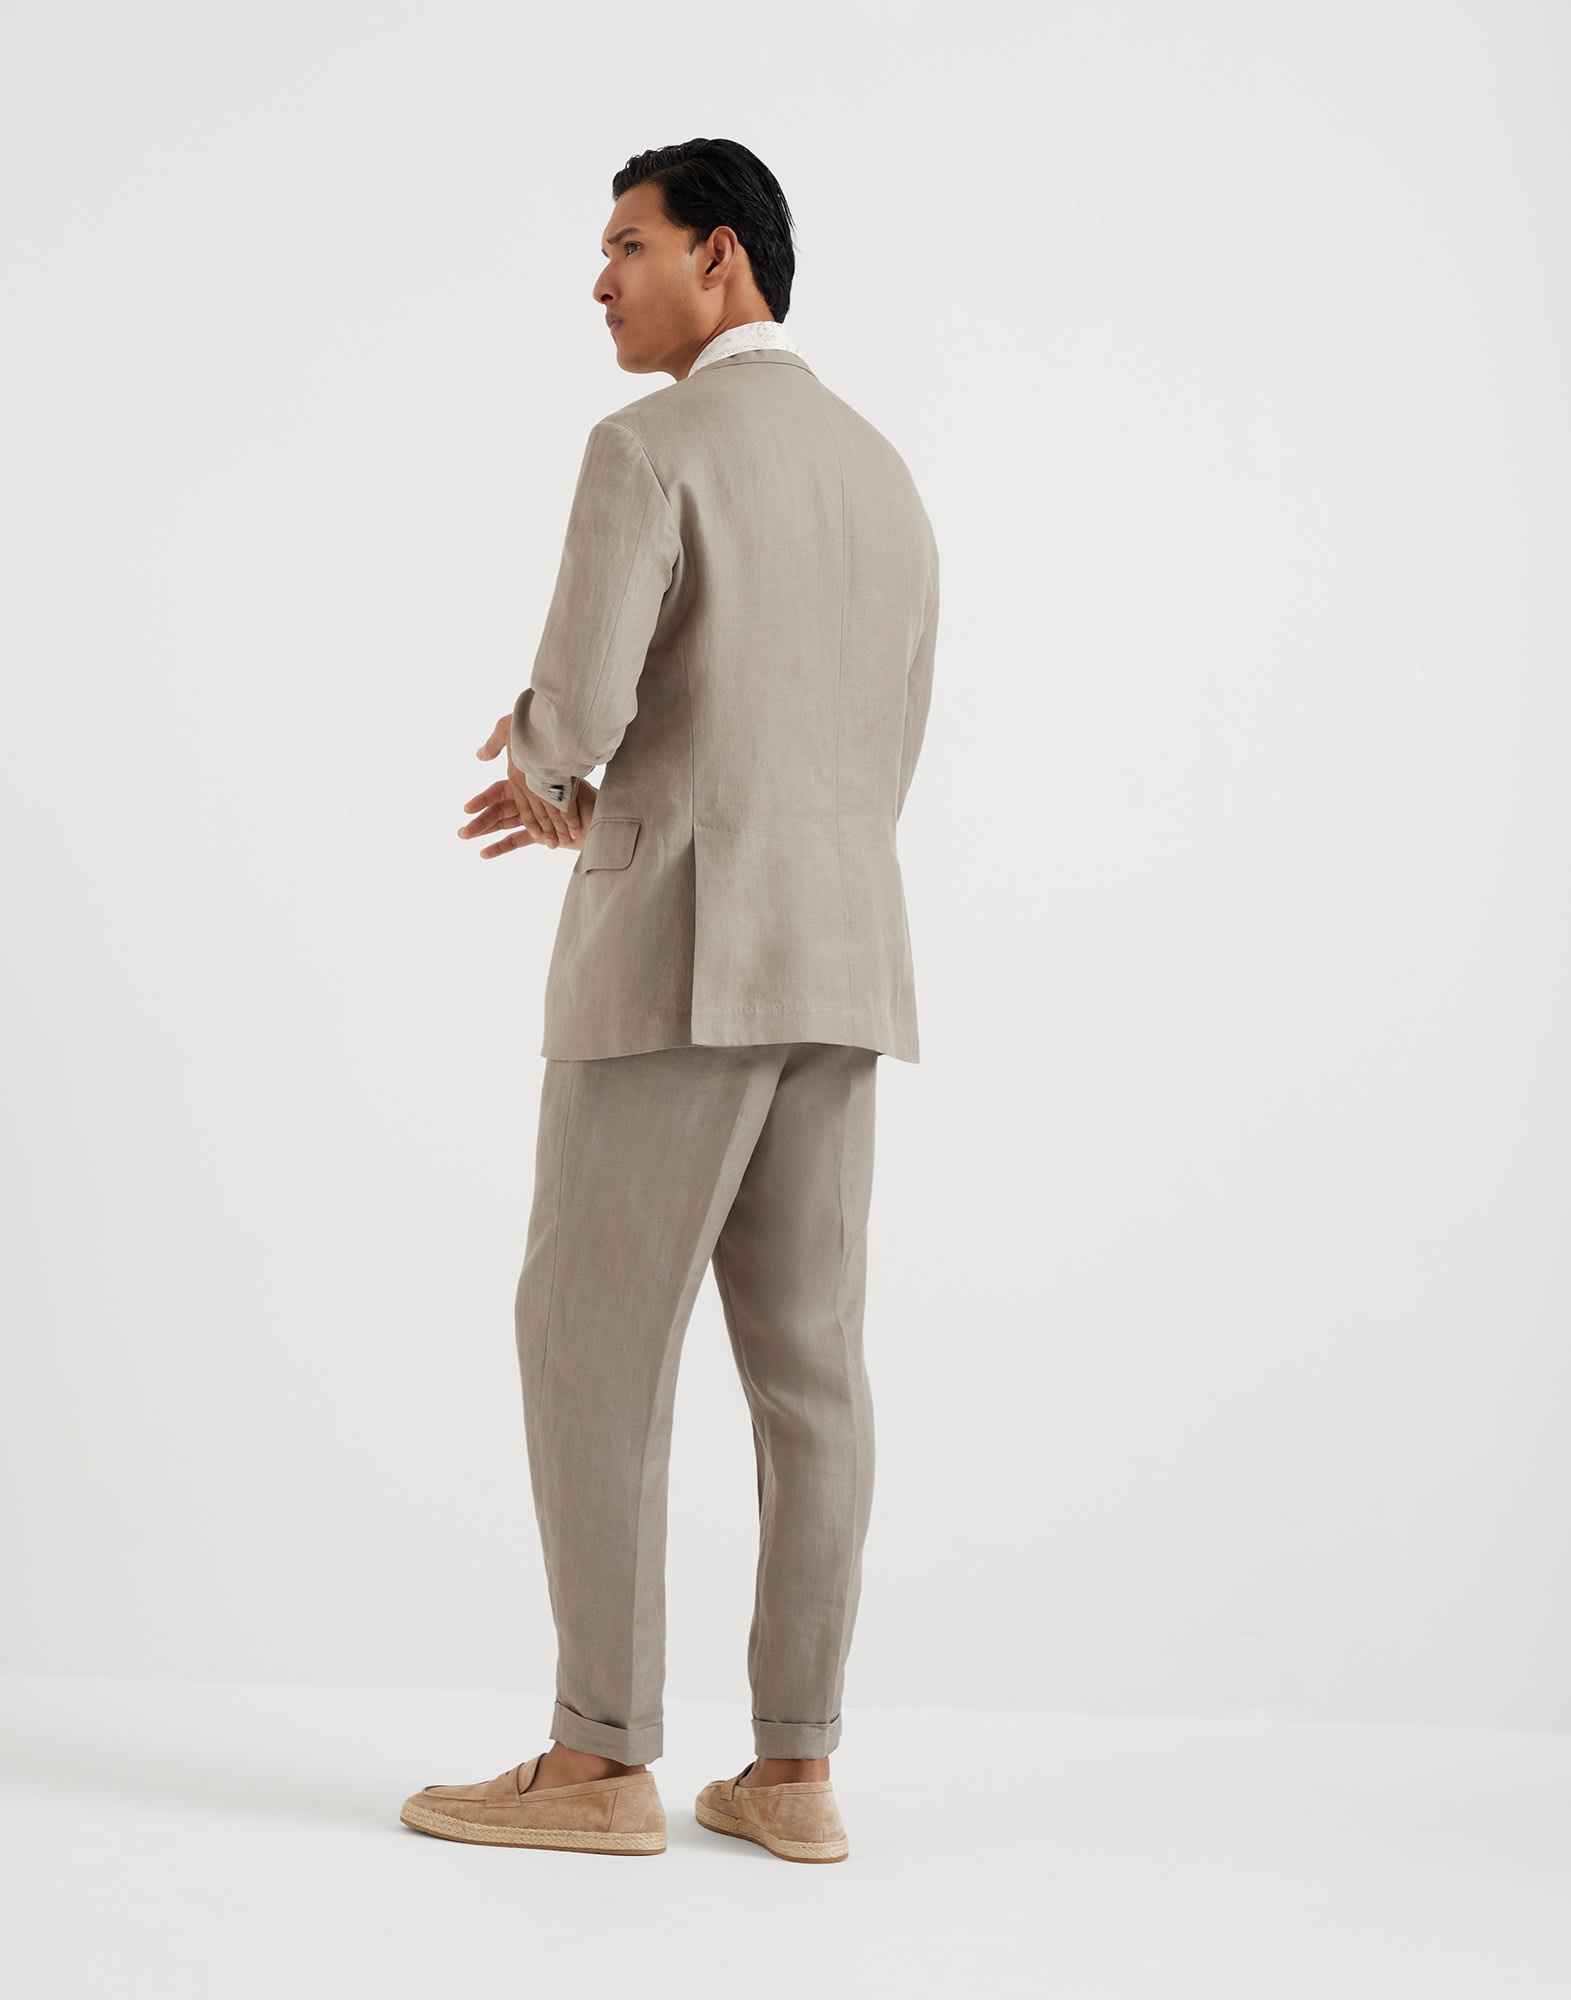 Linen micro chevron Leisure suit: peak lapel jacket with metal buttons and double-pleated trousers - 2